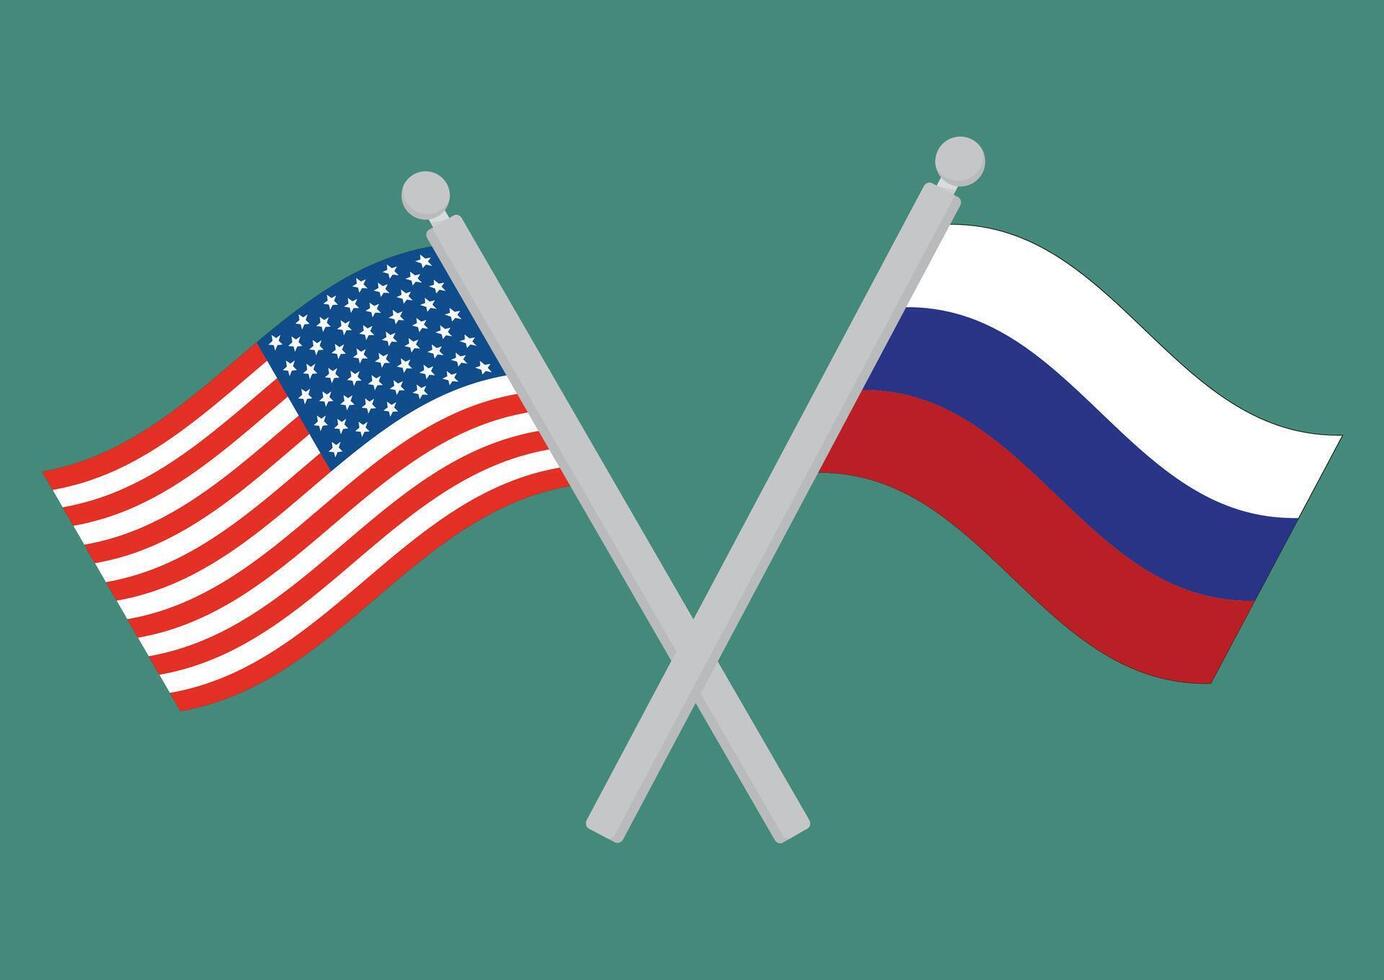 USA vs Russia. Flag of United States of America and Russia on flagpole vector